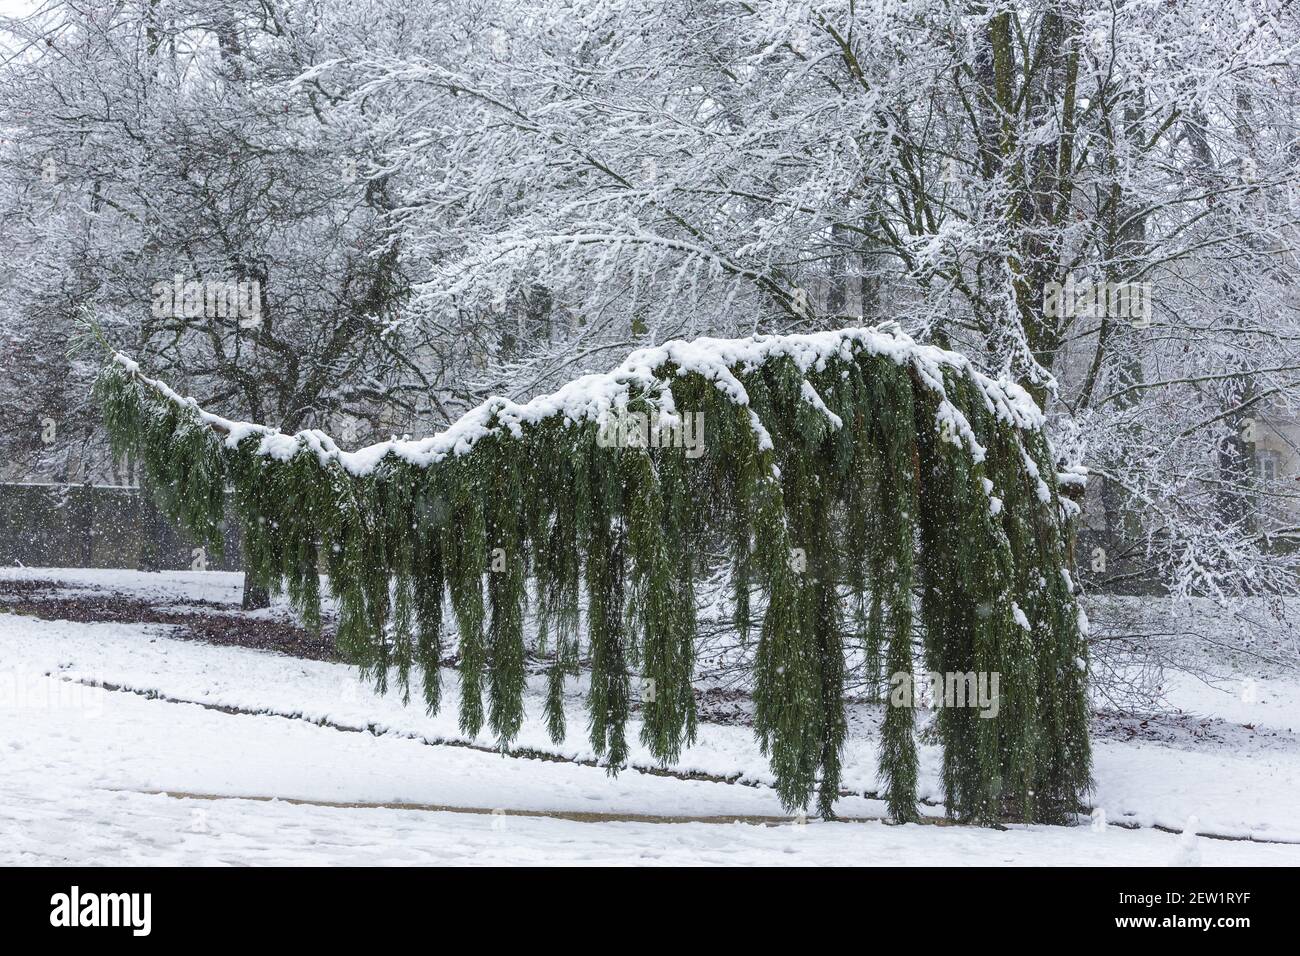 France, Meurthe et Moselle, Nancy, the weeping sequoia (sequoiadendron giganteum pendulum) of Pepiniere public garden built close to Stanislas square (former royal square) built by Stanislas Leszczynski, king of Poland and last duke of Stock Photo